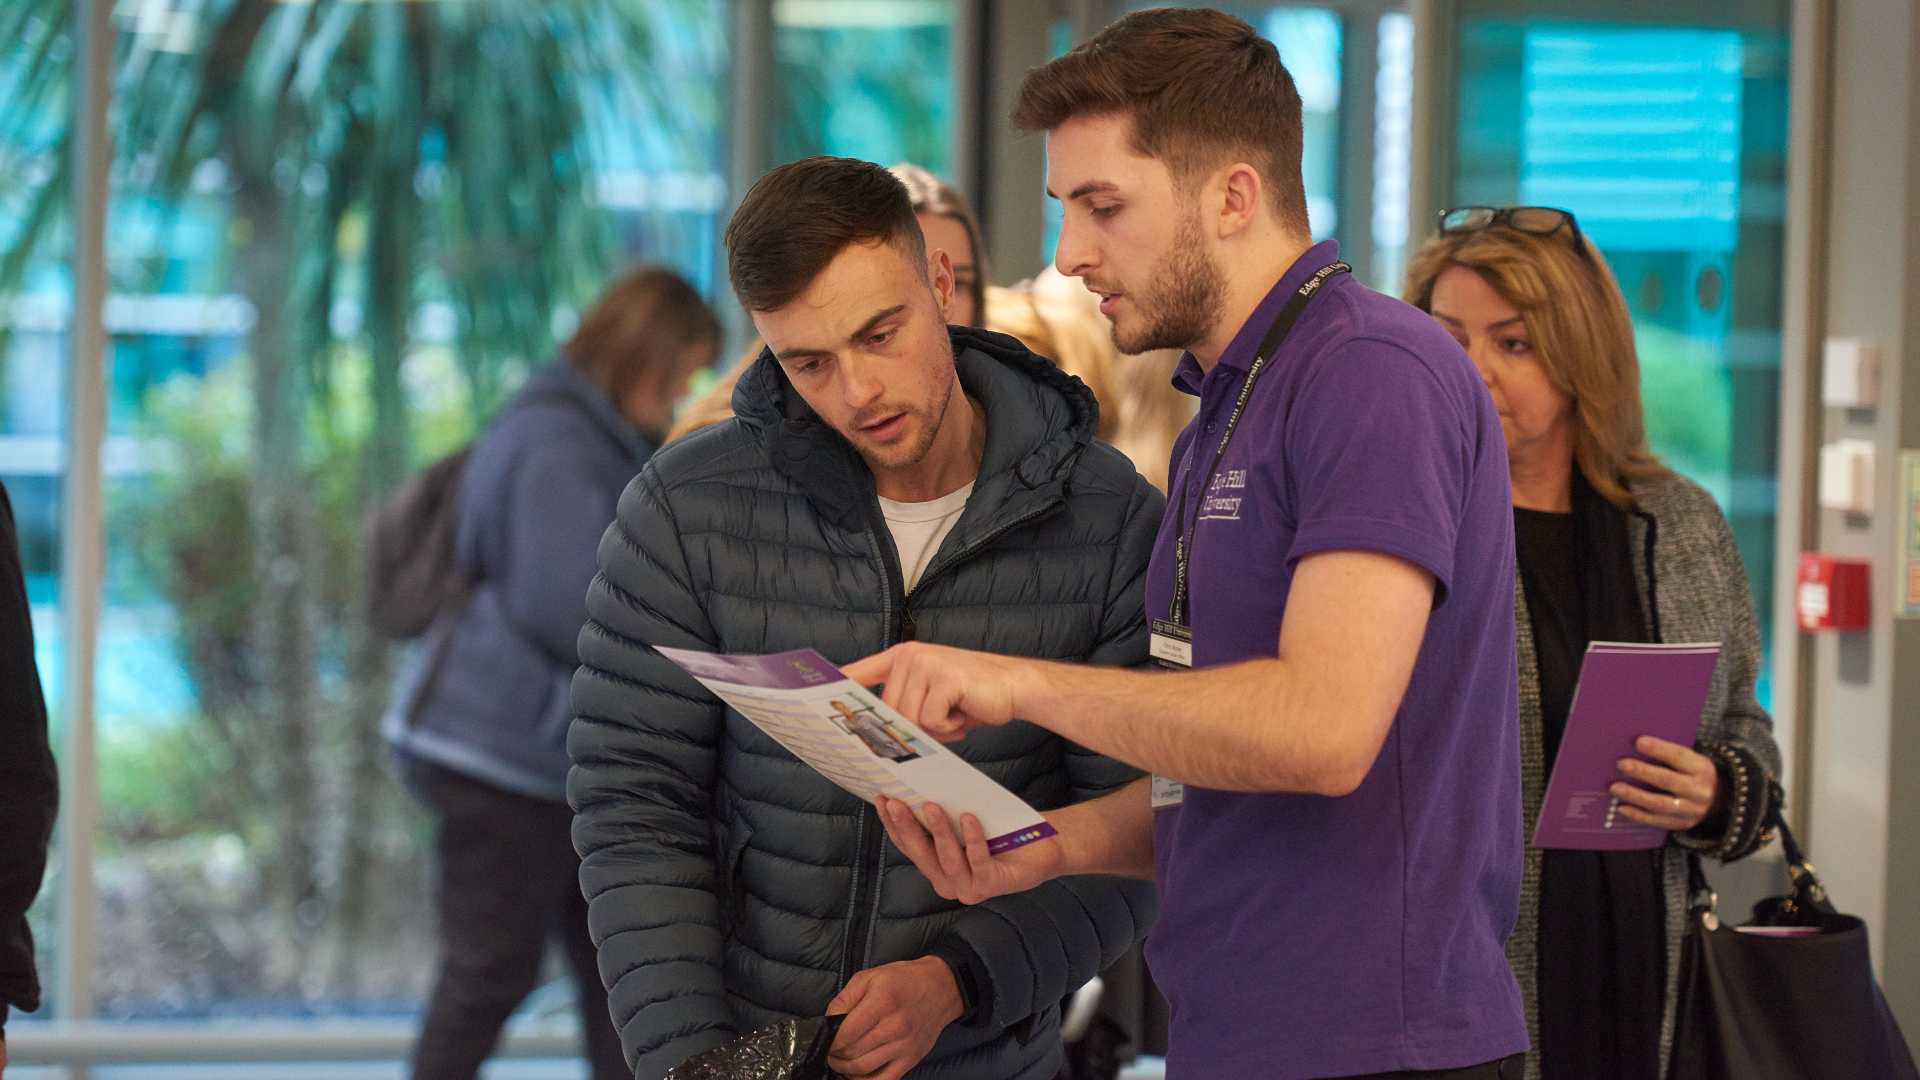 Staff explaining a course leaflet to a student. The staff member is wearing an Edge Hill tabard